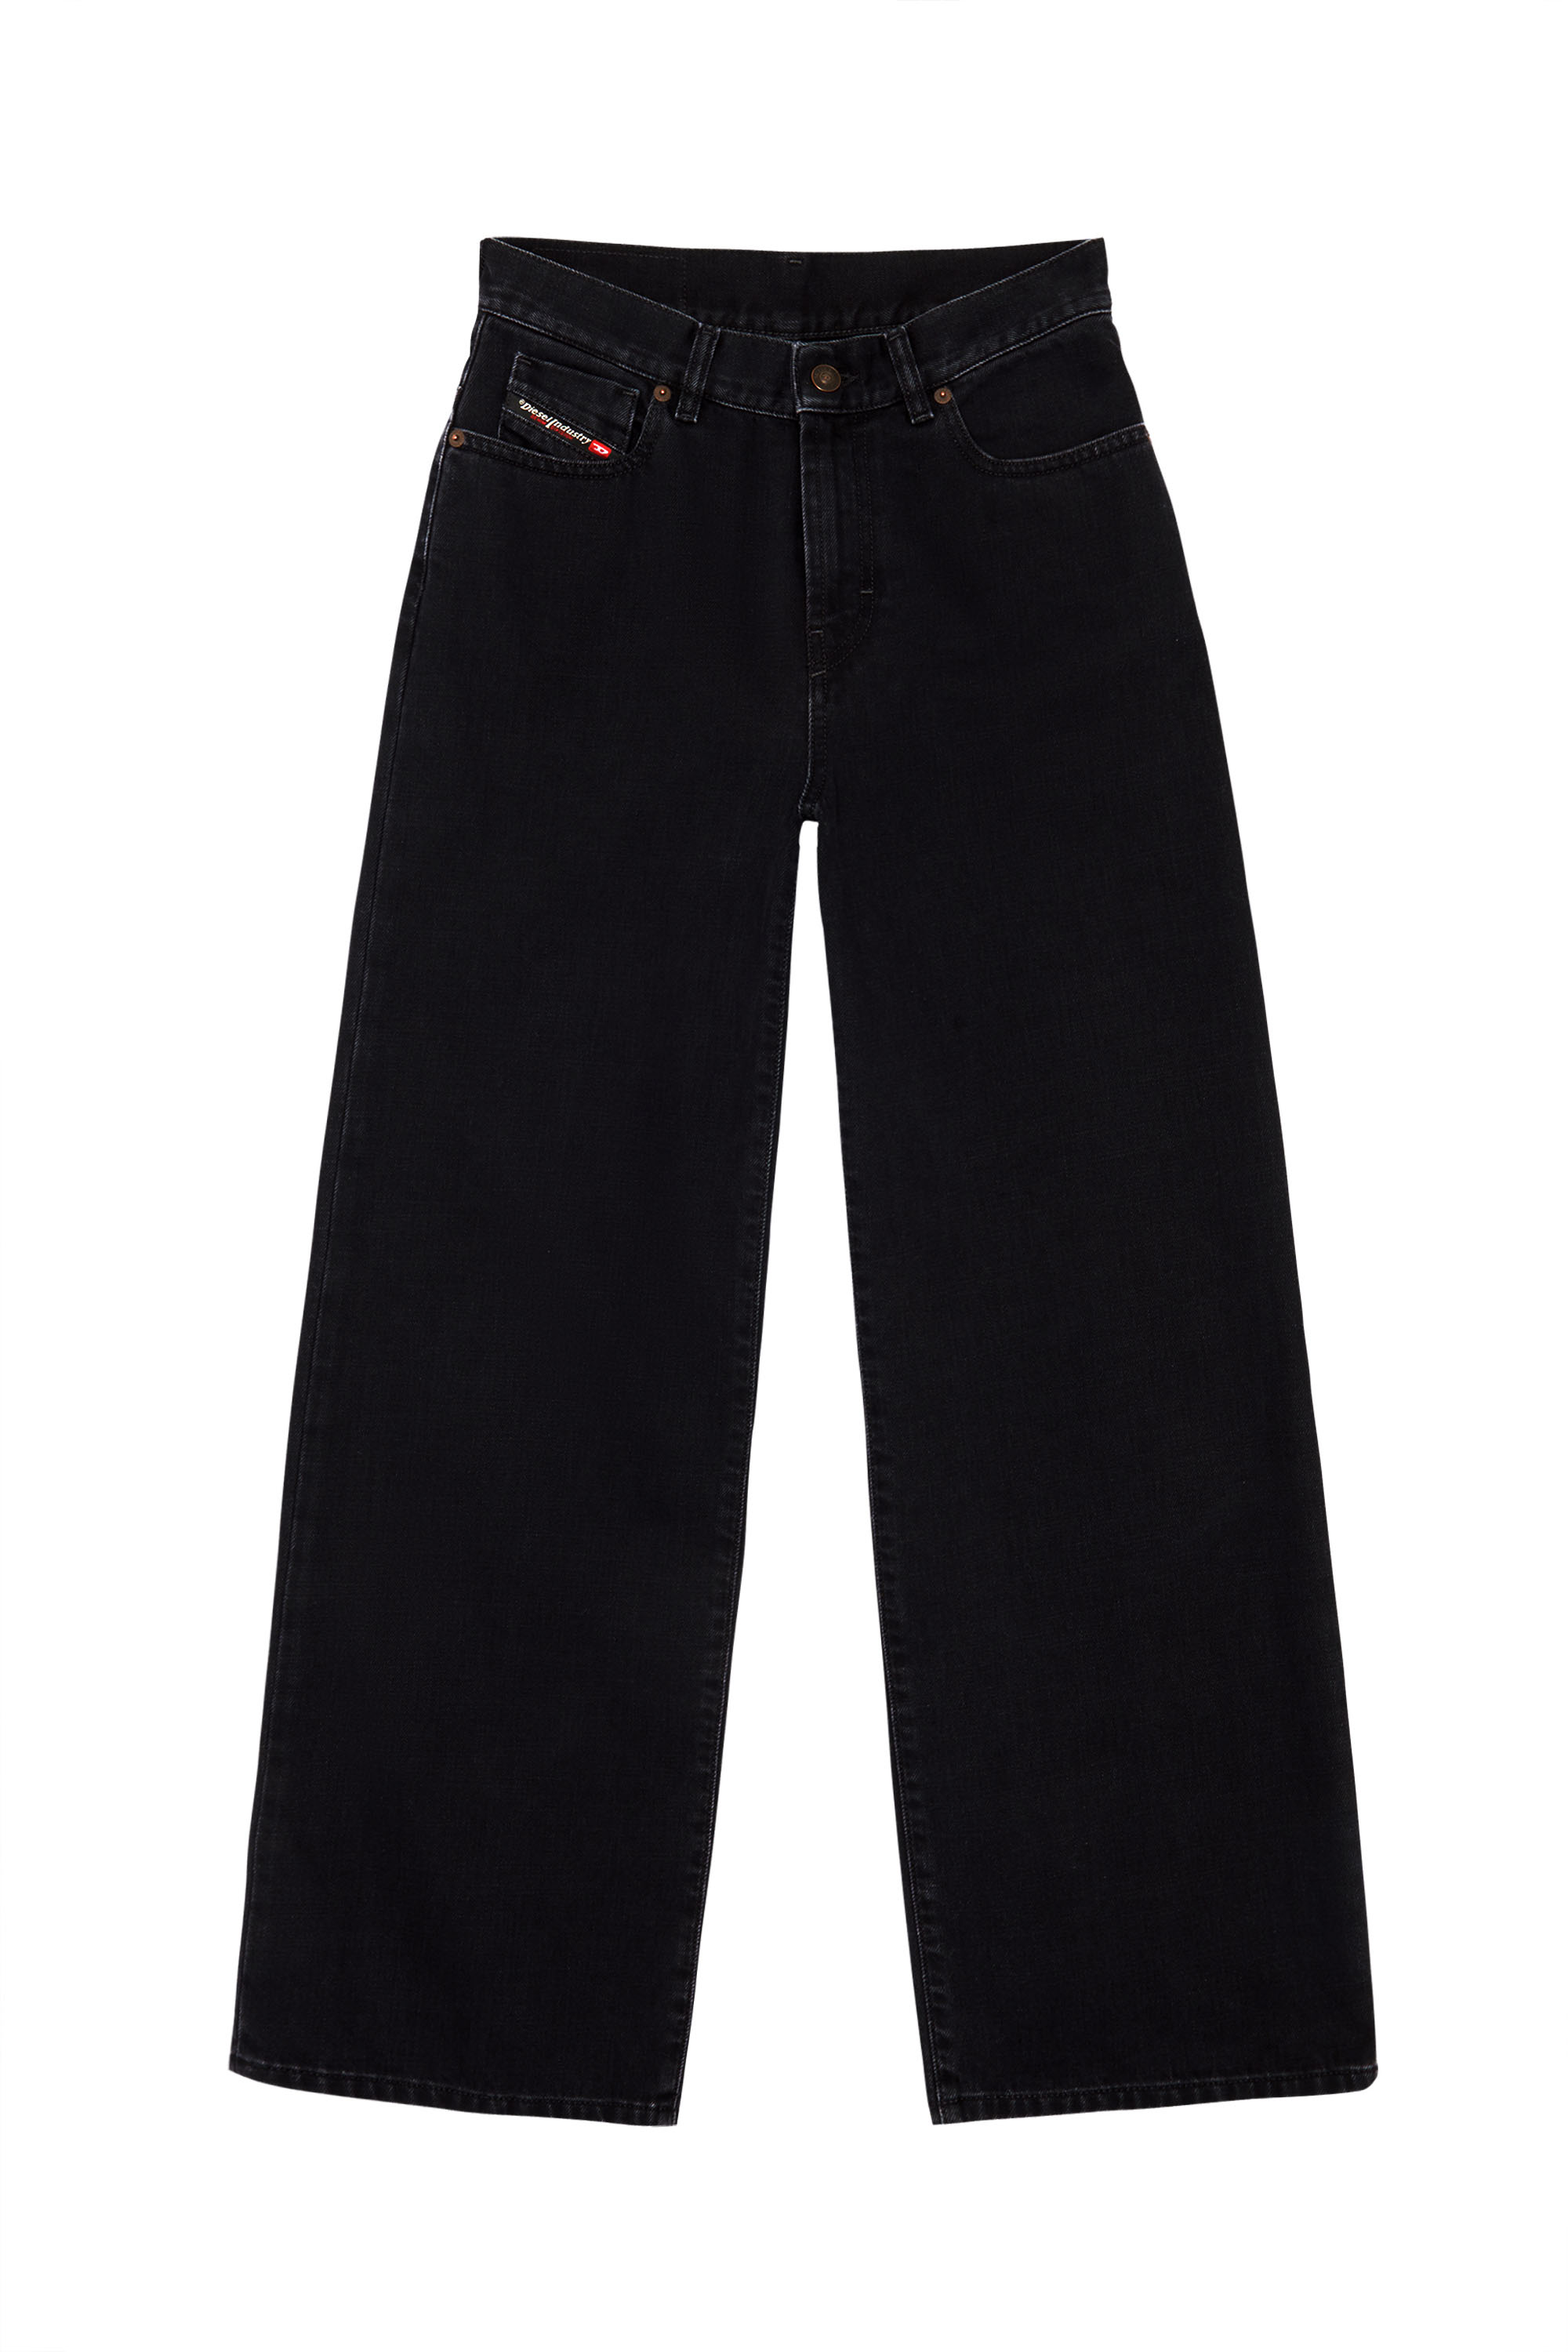 2000 Widee Z09RL Bootcut and Flare Jeans, Schwarz/Dunkelgrau - Jeans